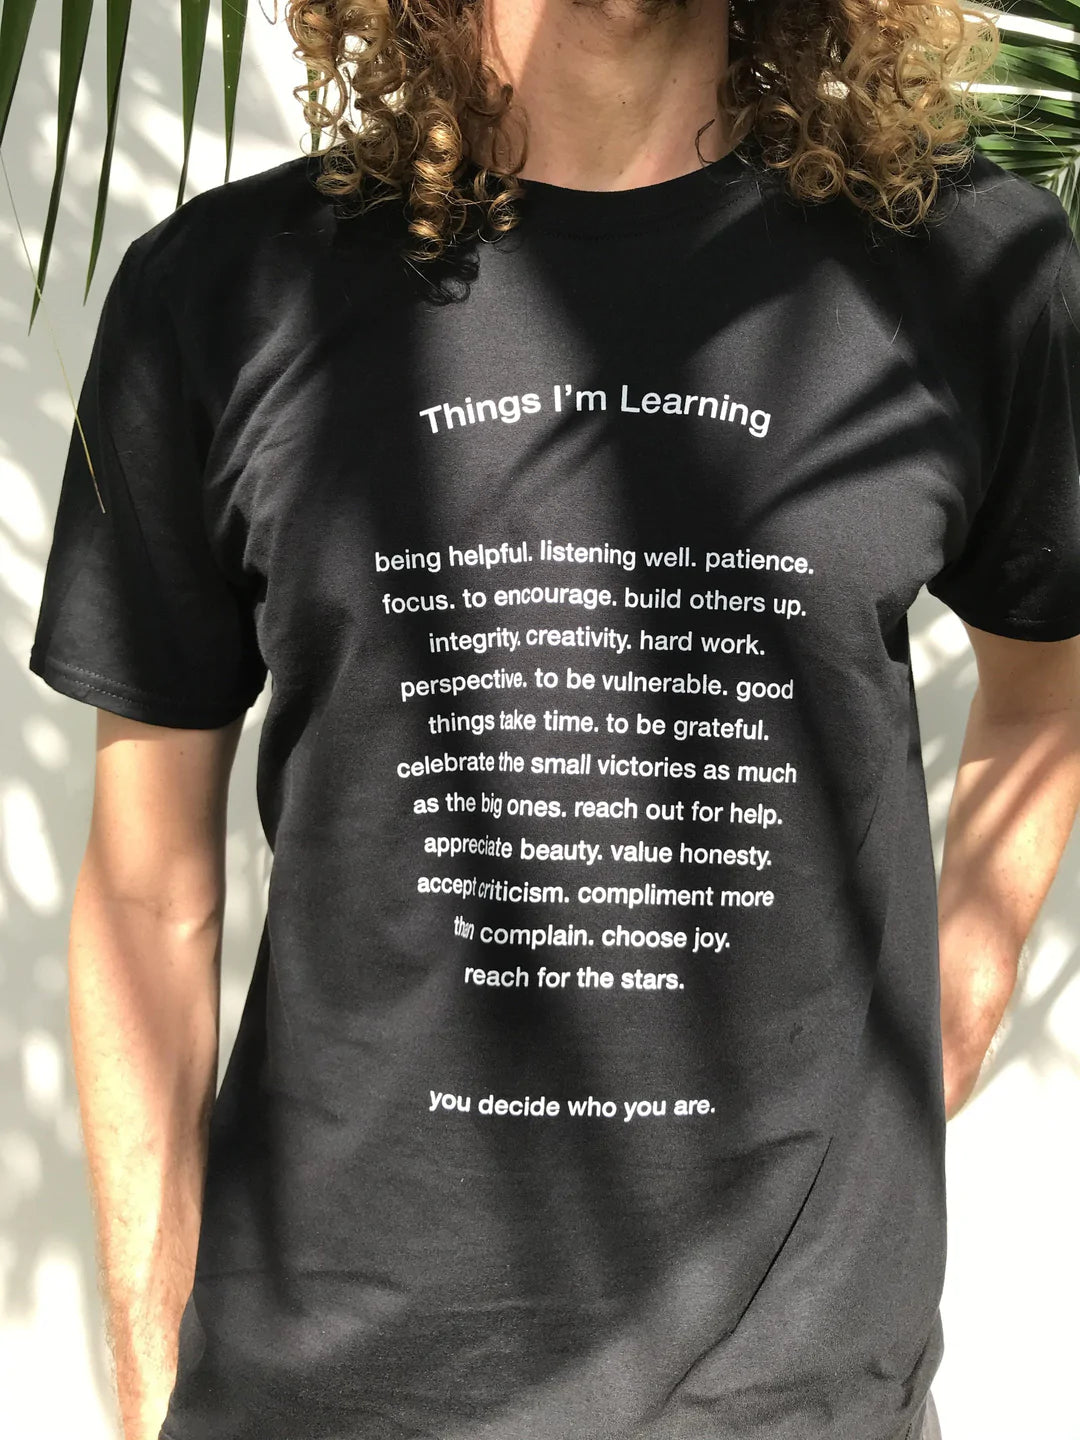 things I'm learning t-shirt